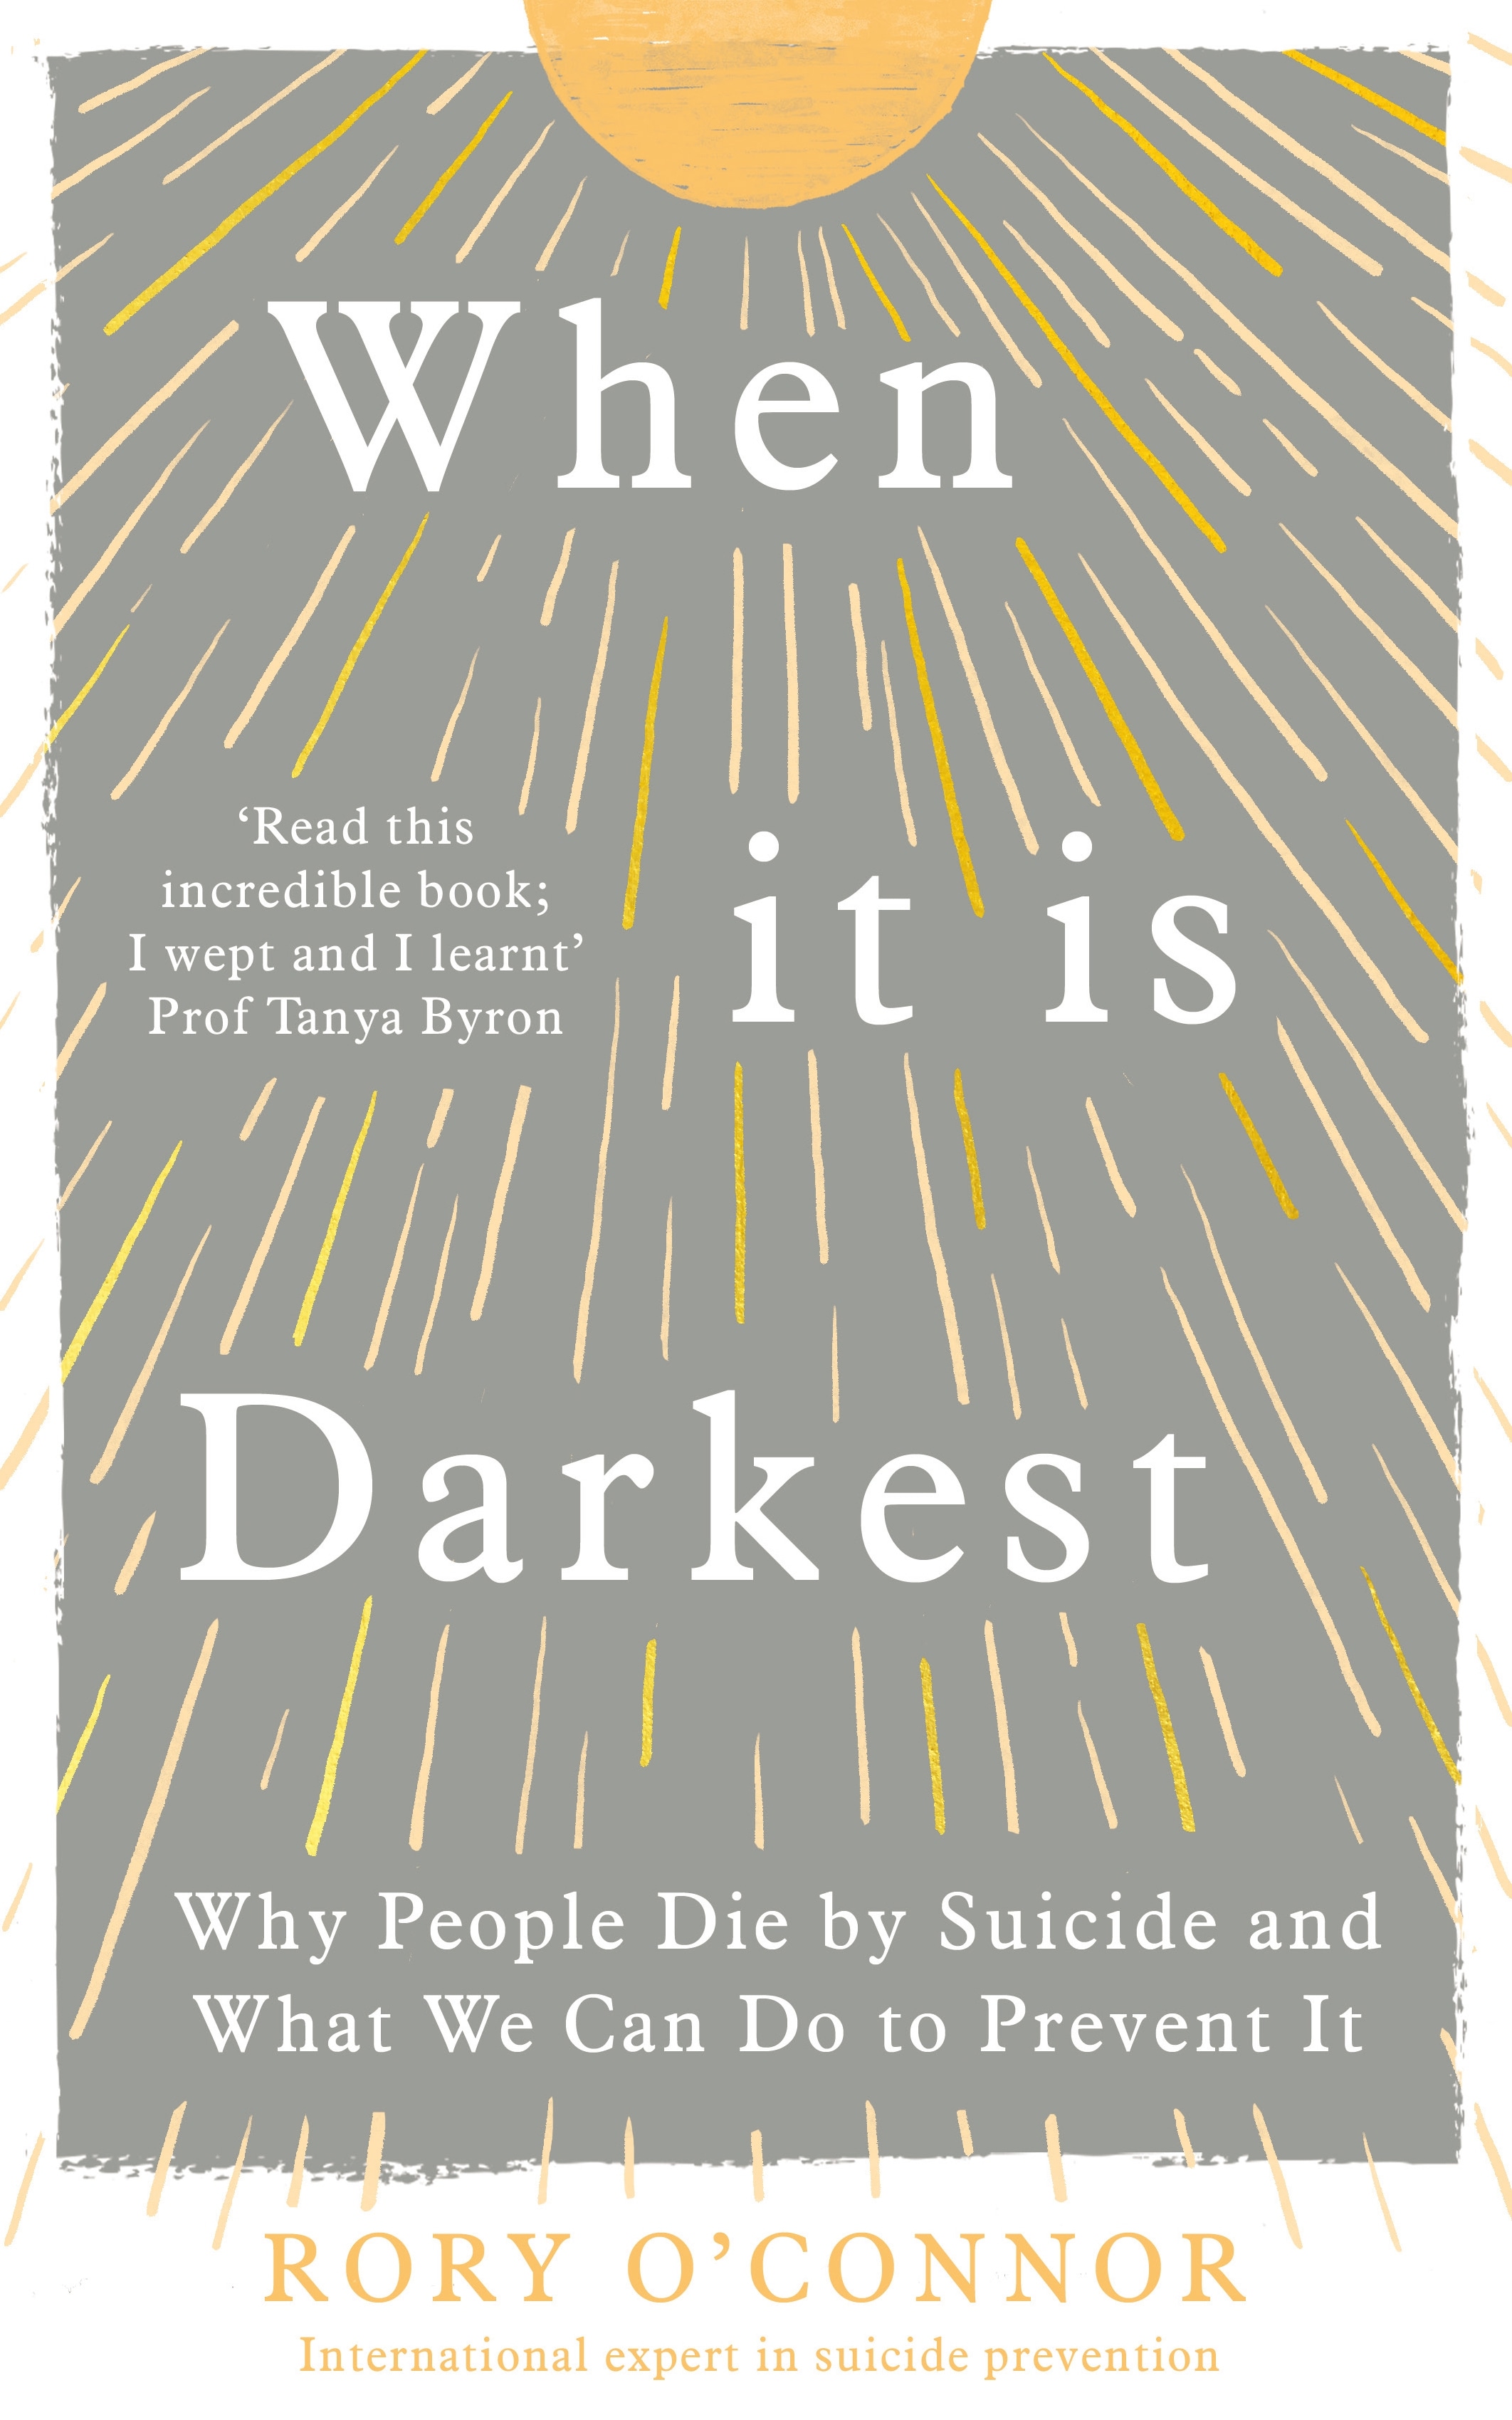 Book “When It Is Darkest” by Rory O’Connor — May 6, 2021